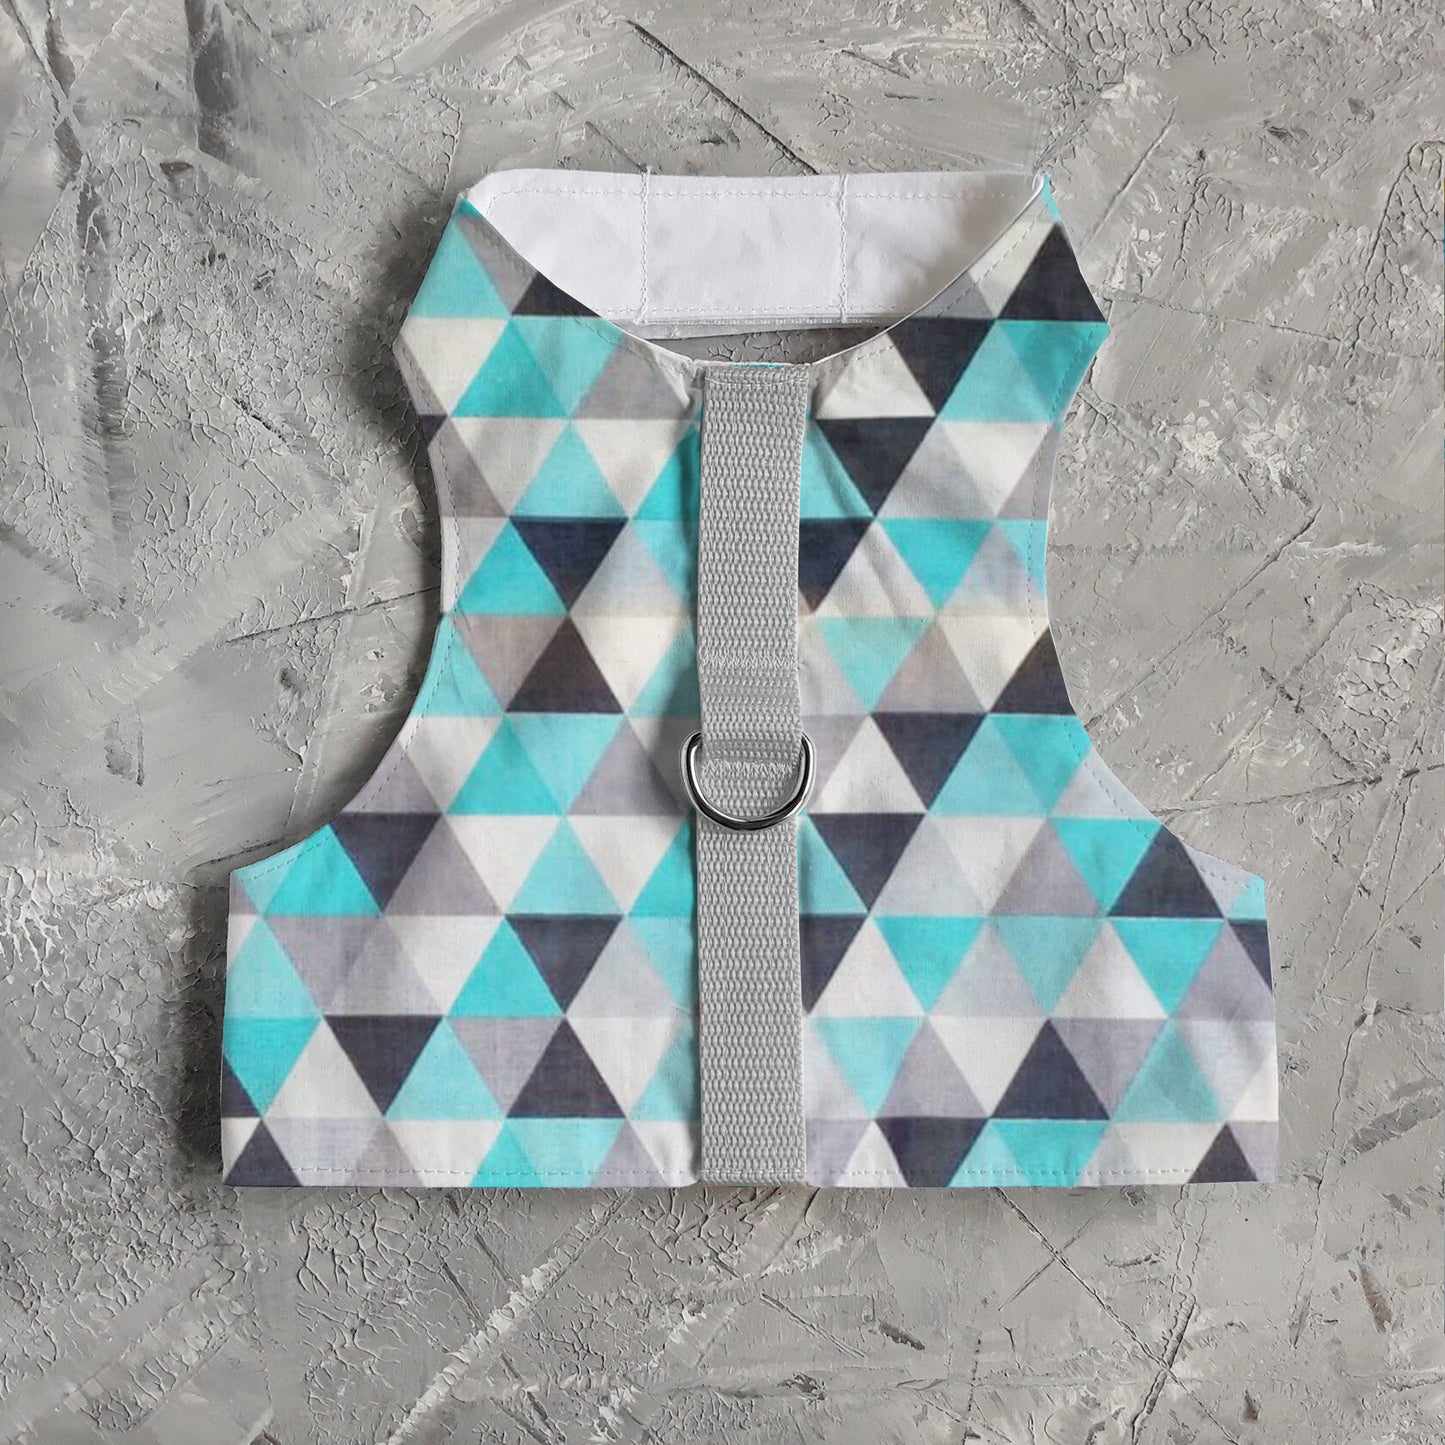 Difficult to escape and safety cat harness. Breathable cotton vest with blue triangles print